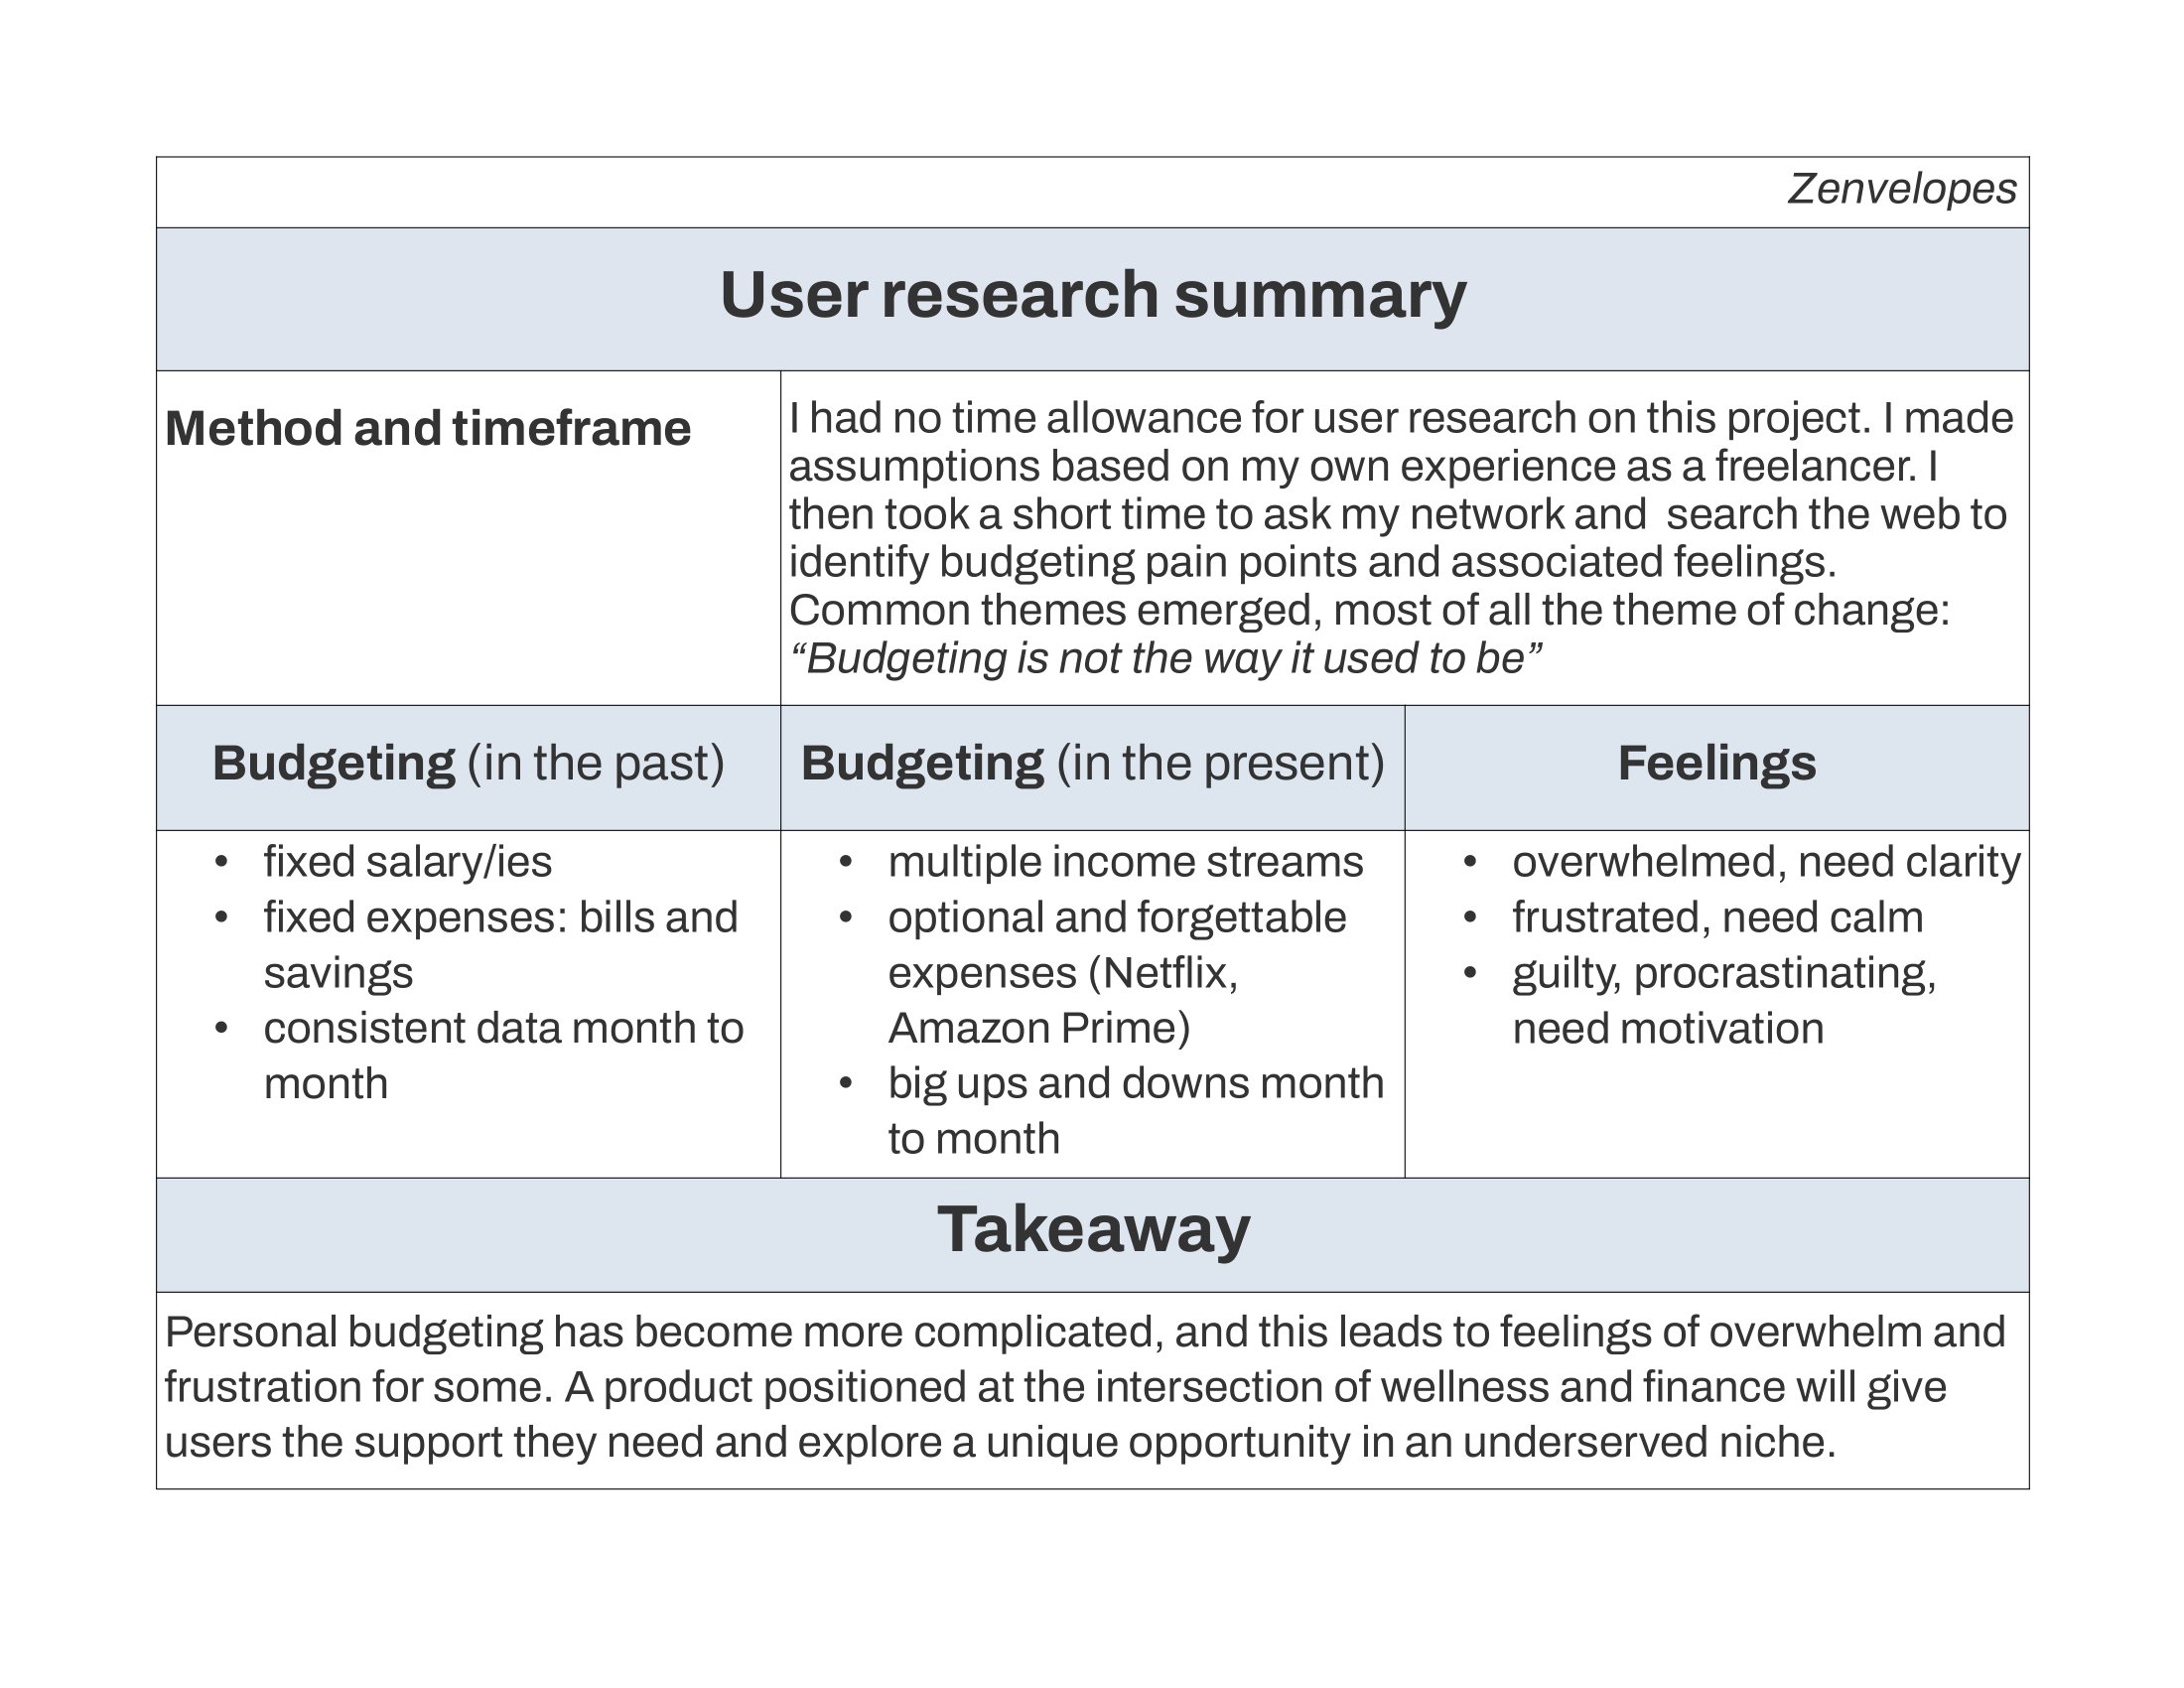 chart describing the needs and pain points of target users